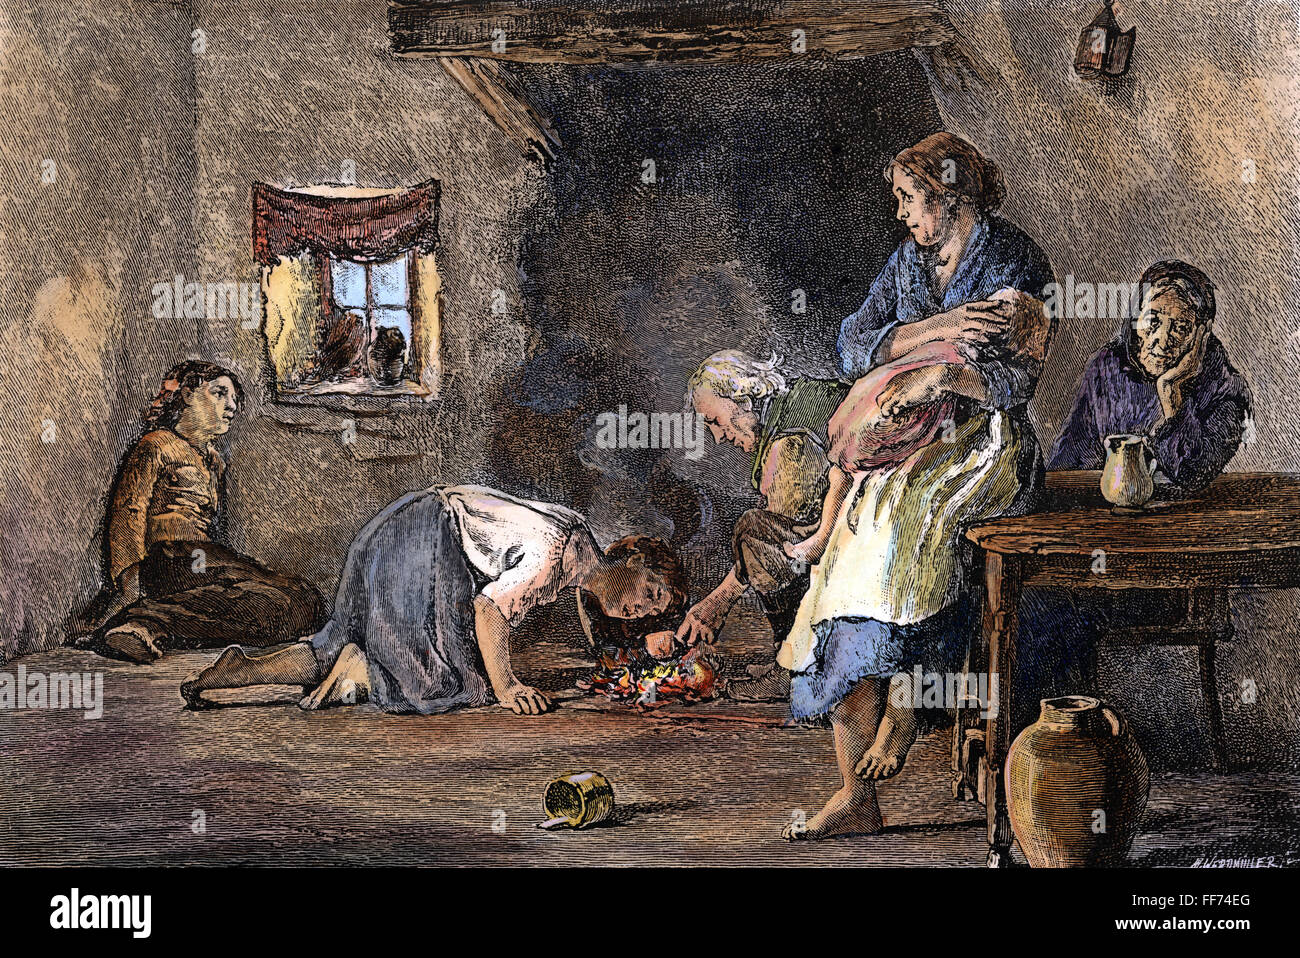 POTATO FAMINE. /nInterior of a peasant's hut during the Great Potato Famine of 1846-47 in Ireland. Colored engraving, 19th century. Stock Photo